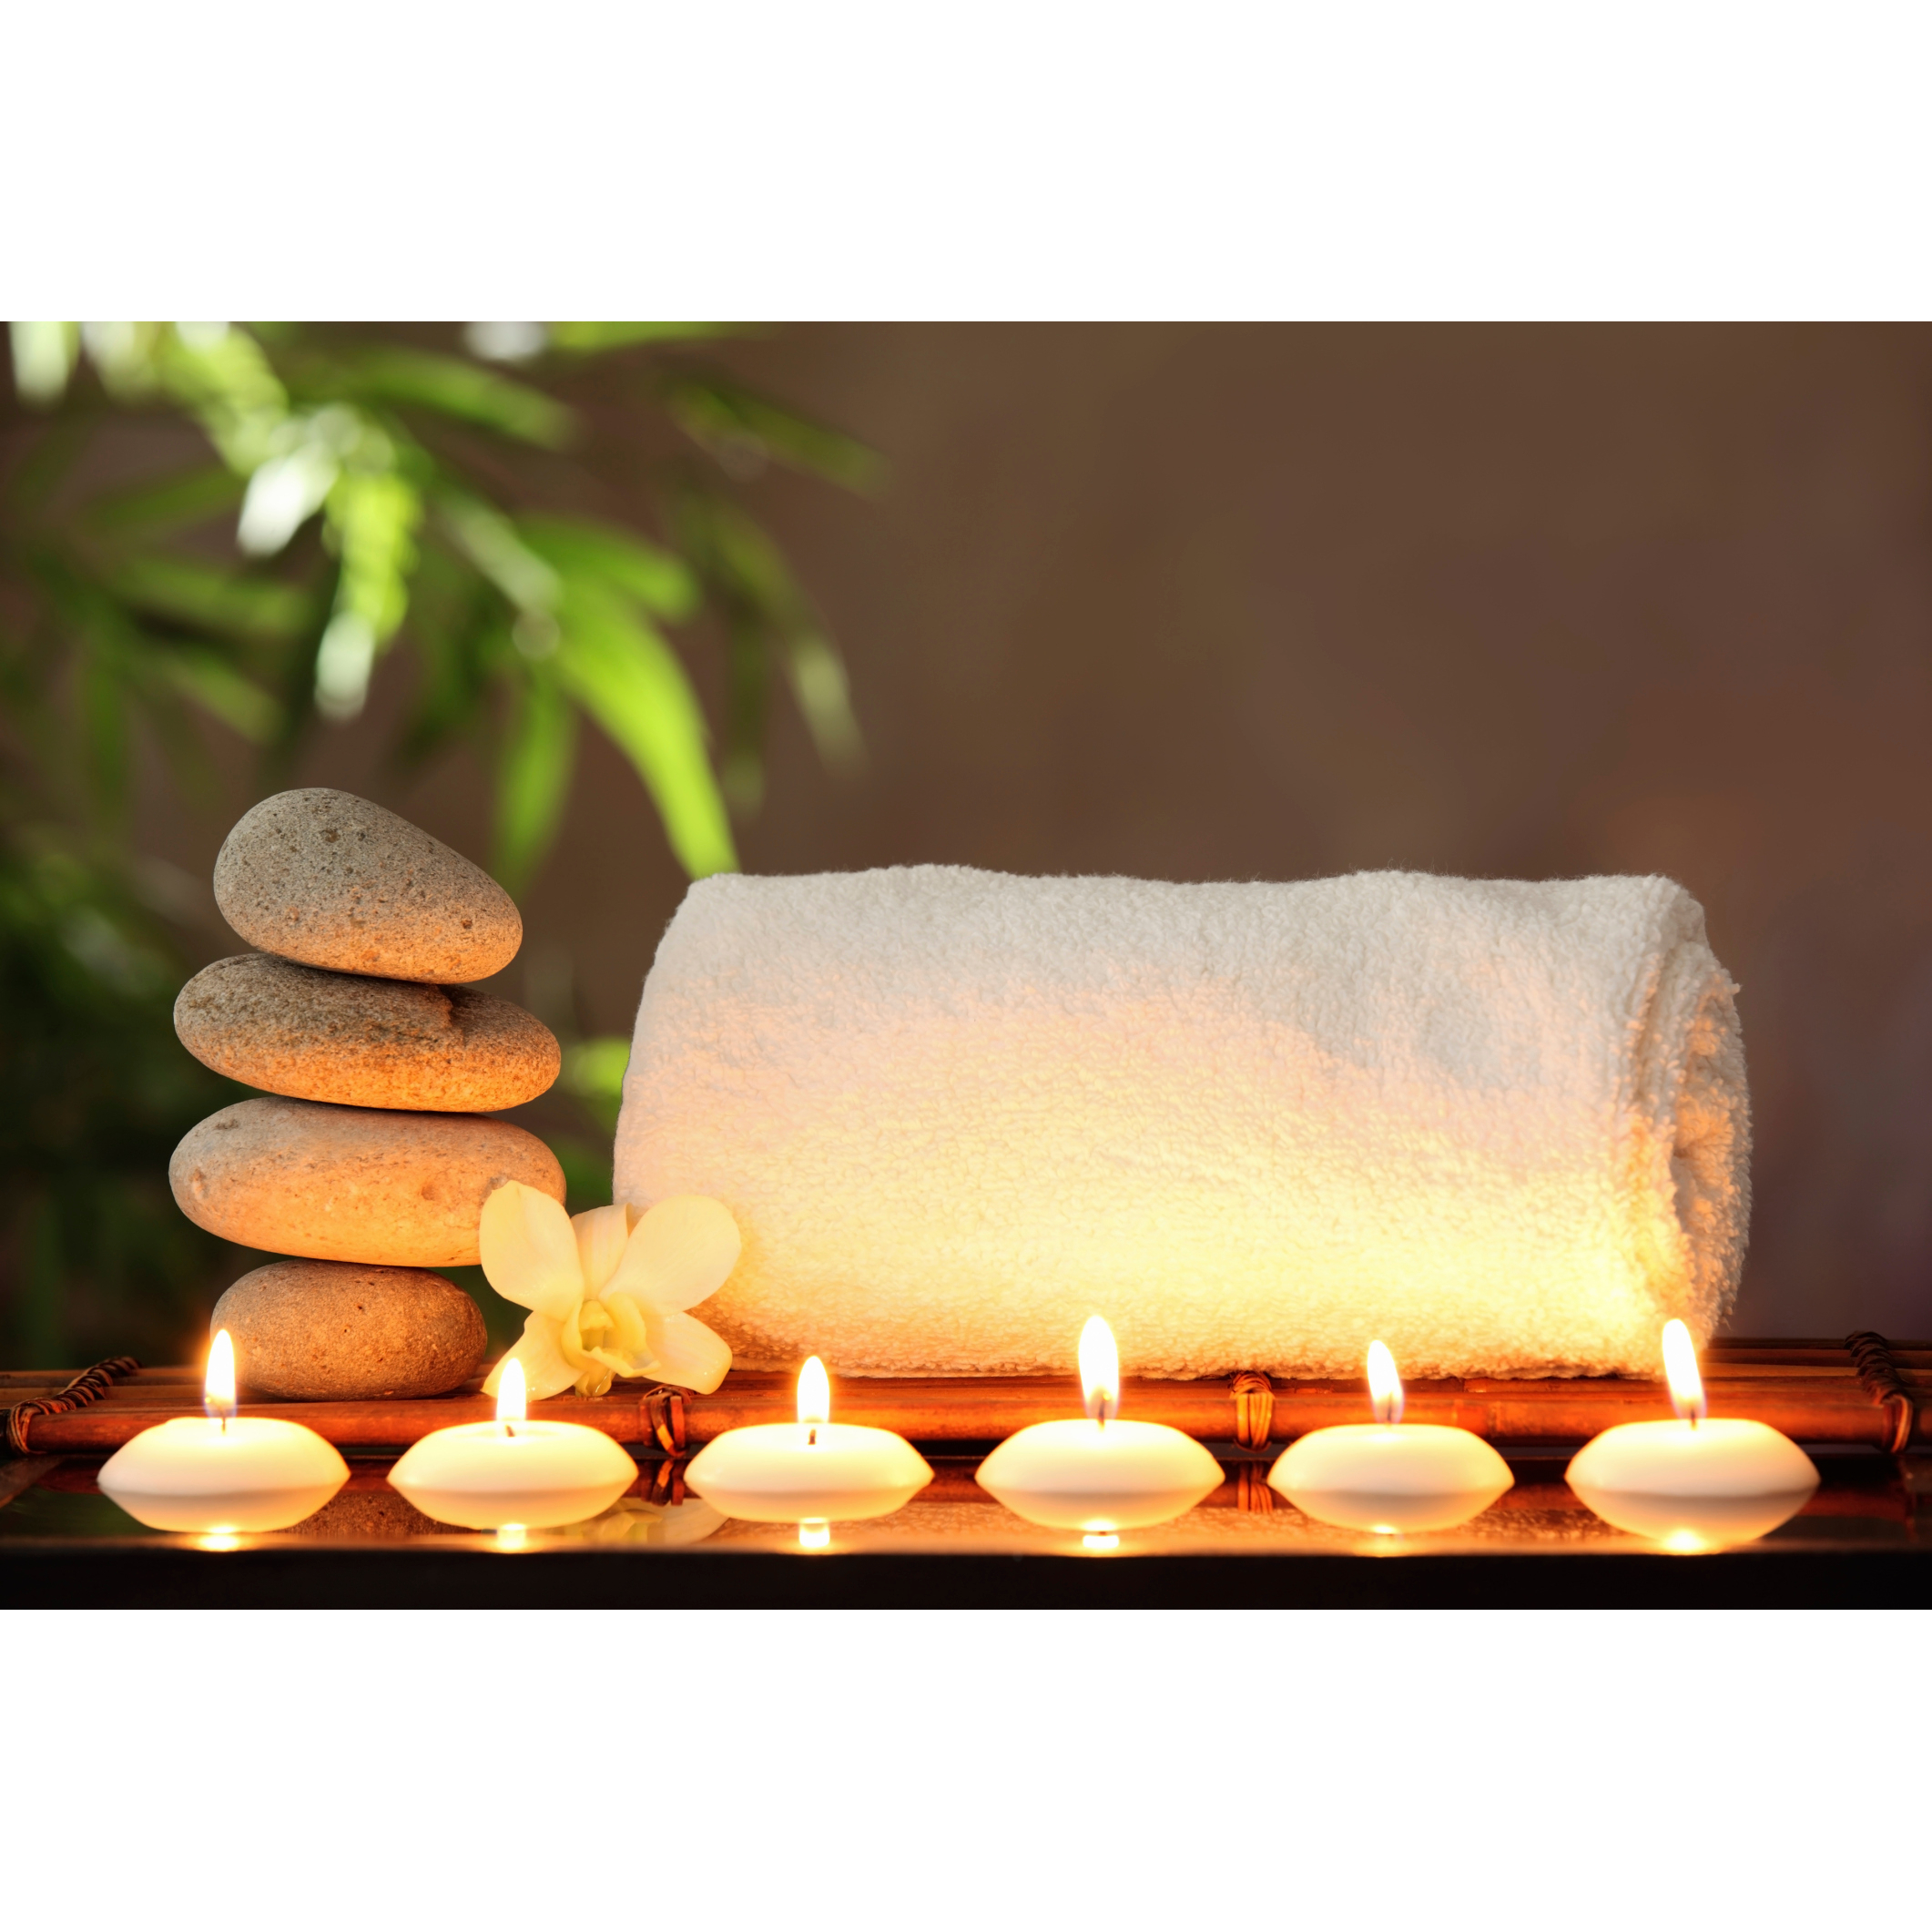 Oasis Day Spa Coupons near me in Brooklyn, NY 11206 | 8coupons